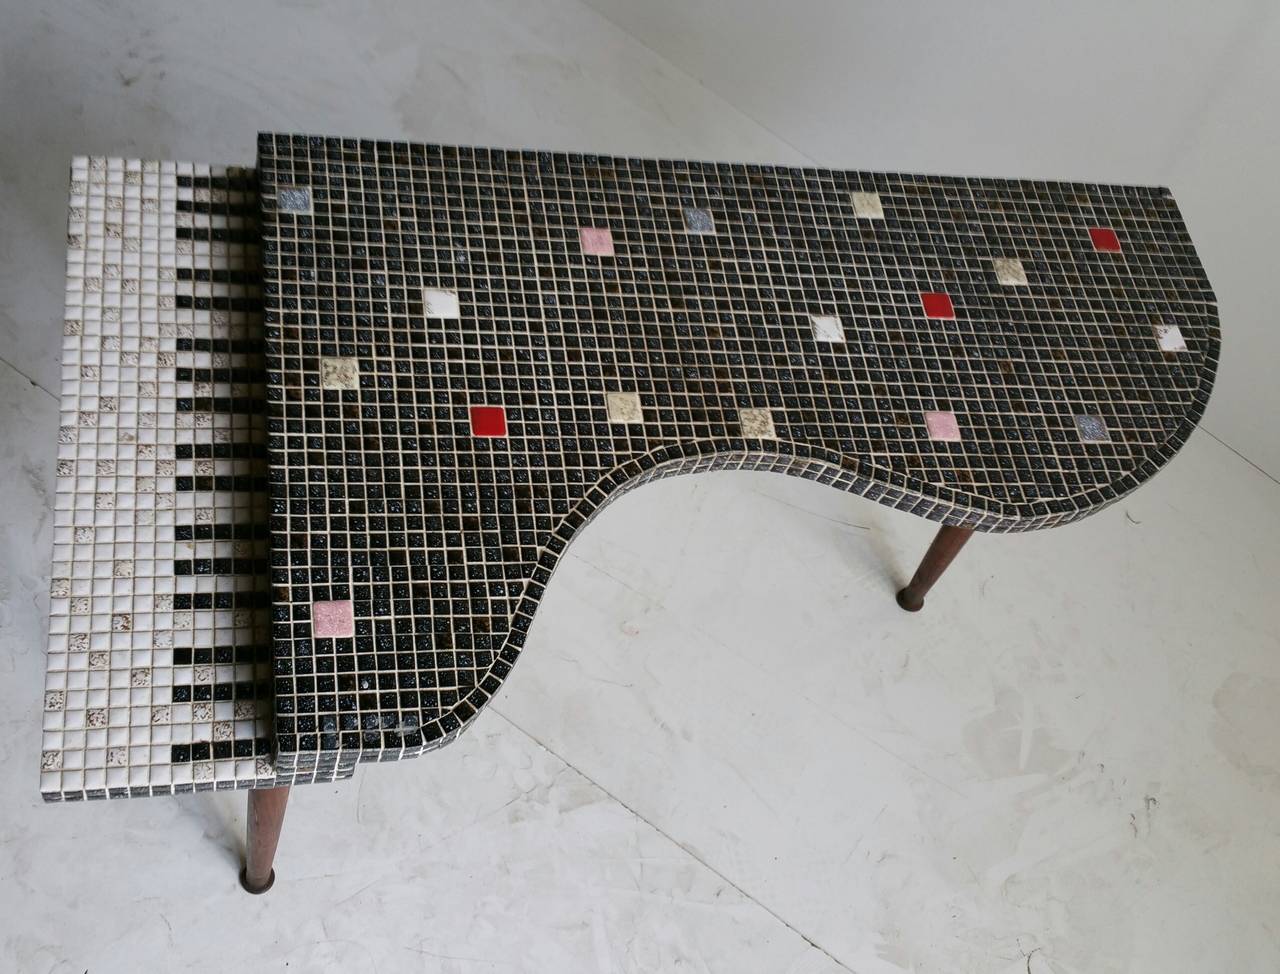 Mid Century Modern Cocktail or Occasional Table. Cleverly crafted and fully covered in mosaic tile in the shape of two level baby grand piano. Definitely handmade. Makes a fun, whimsical statement